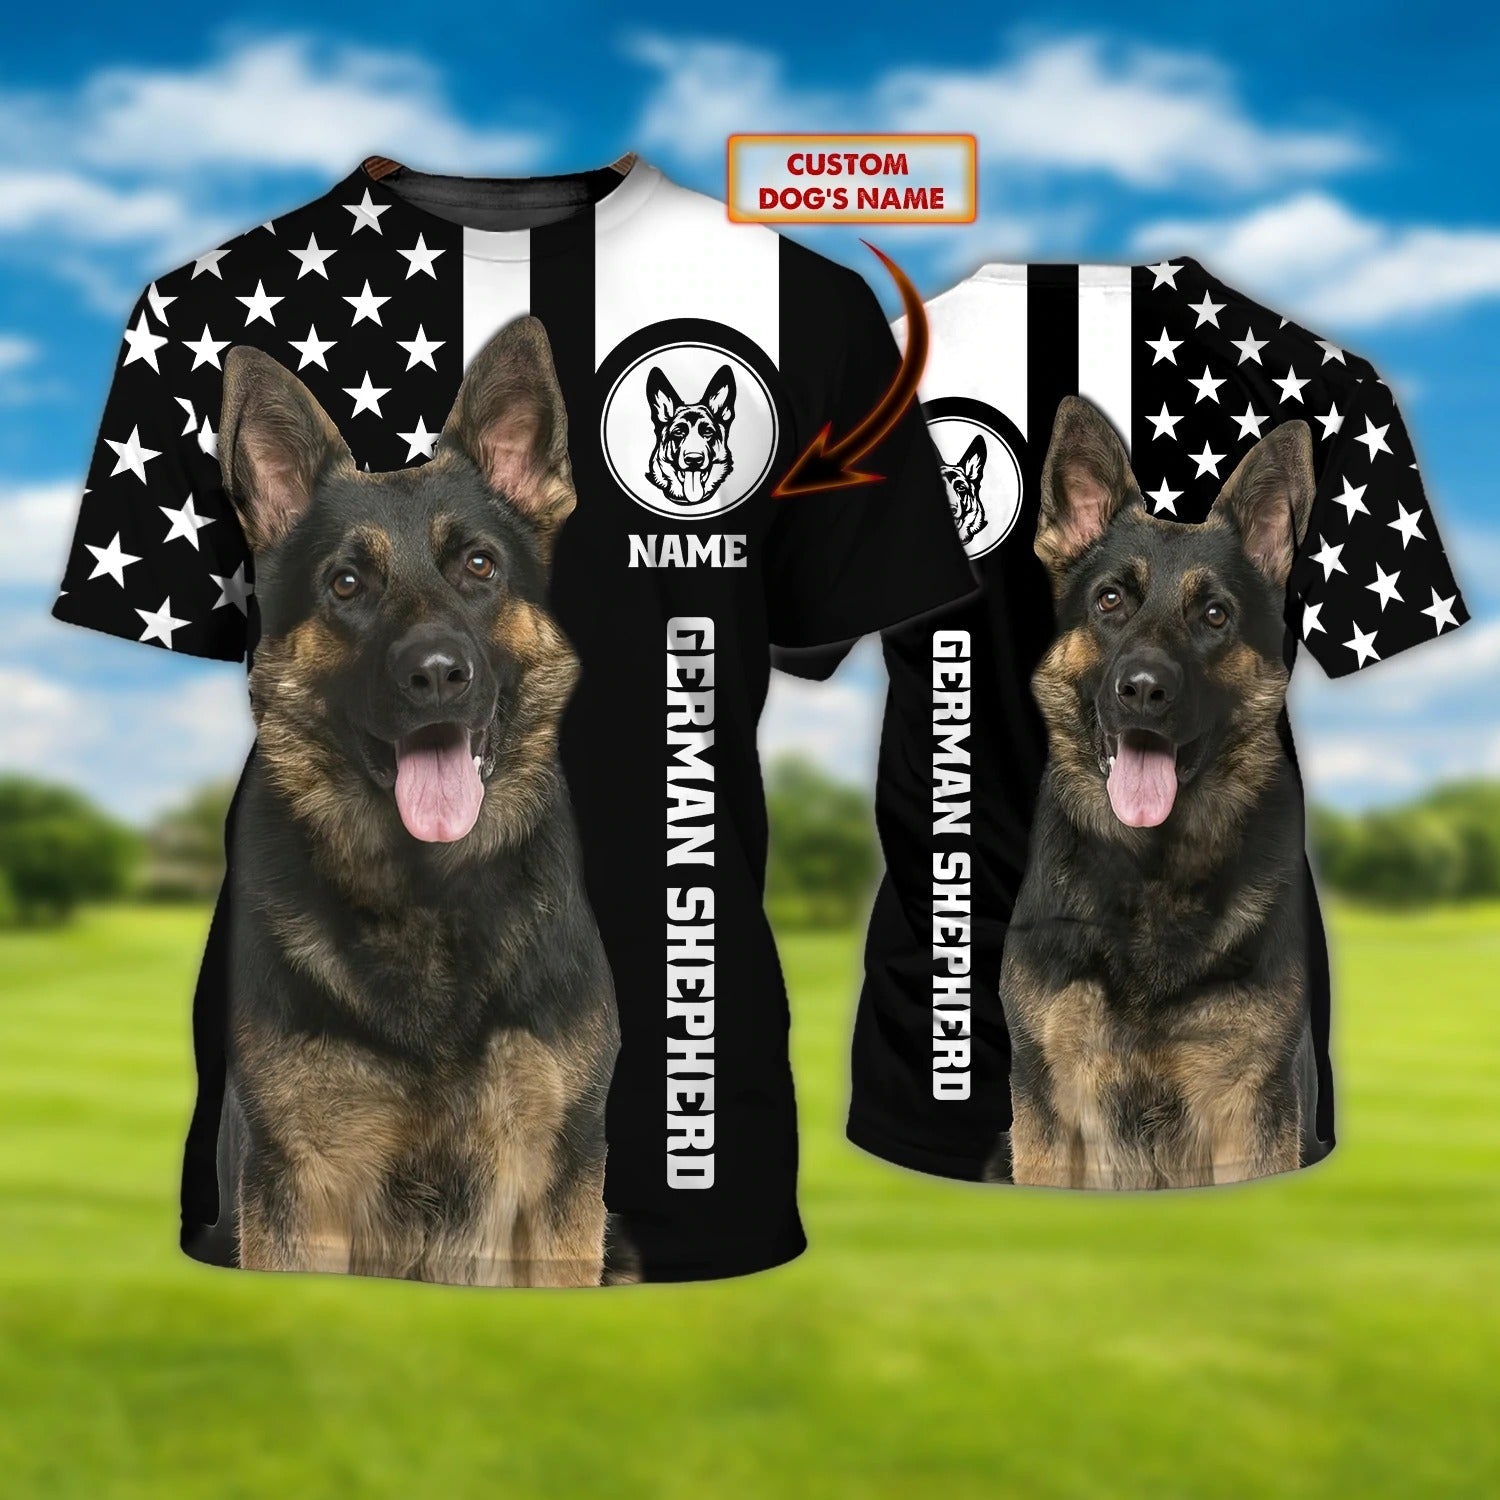 Personalized 3D Full Printed Dog In Tshirt/ German Shepherd Shirts For Adult/ Dog Tshirt For Him Her/ Dog Lover Shirt